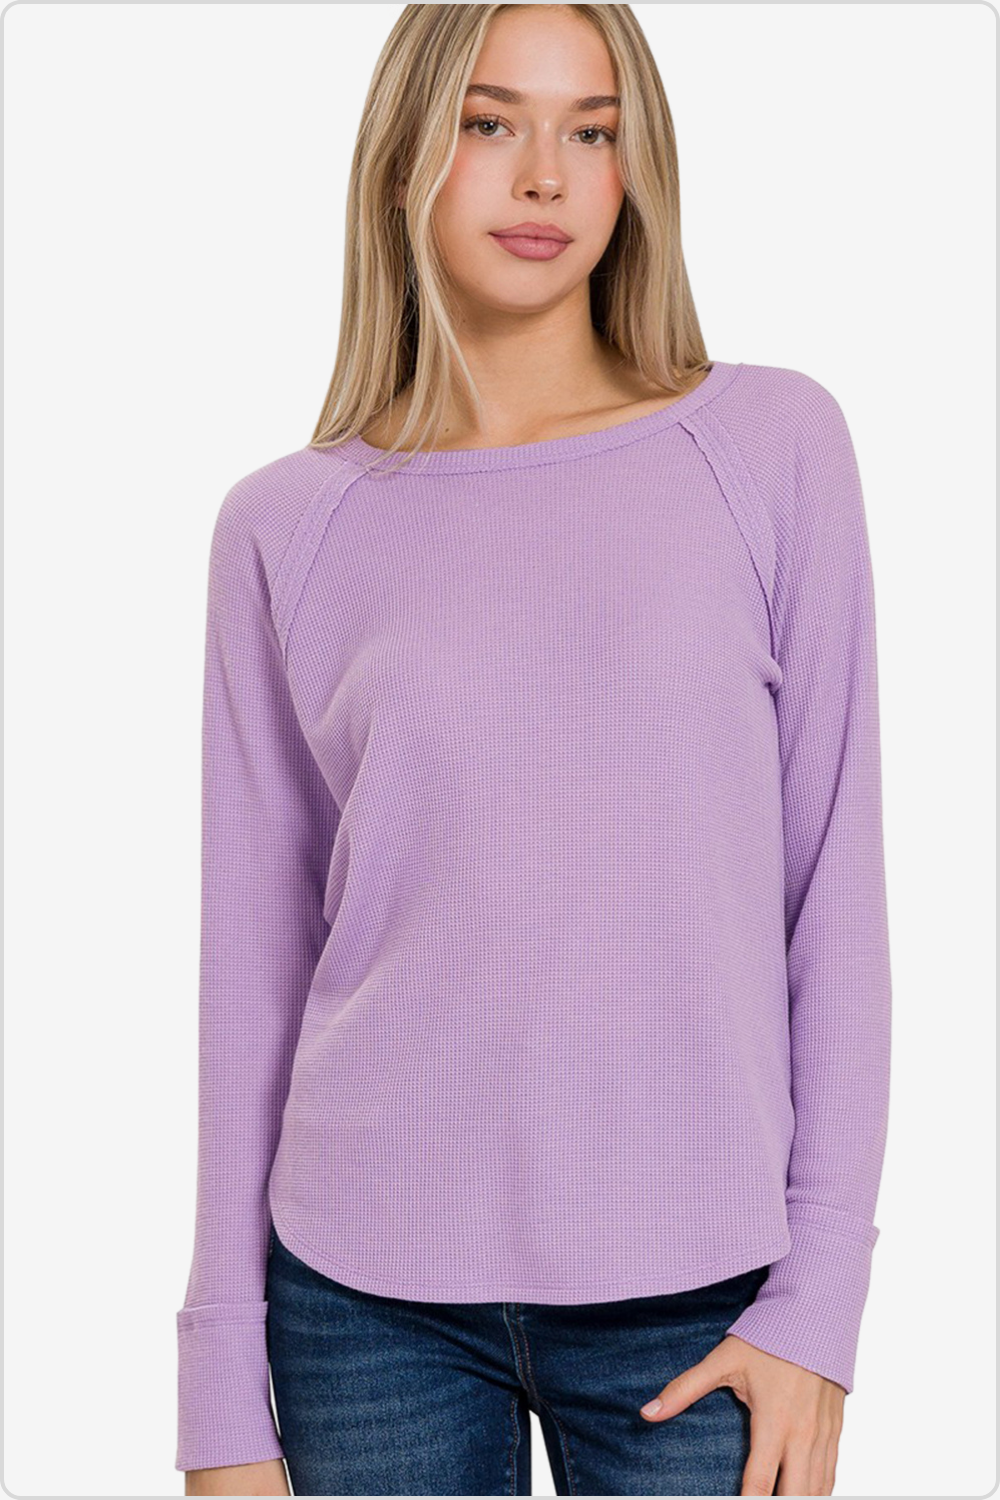 Classic waffle knit long sleeve t-shirt, cozy and versatile